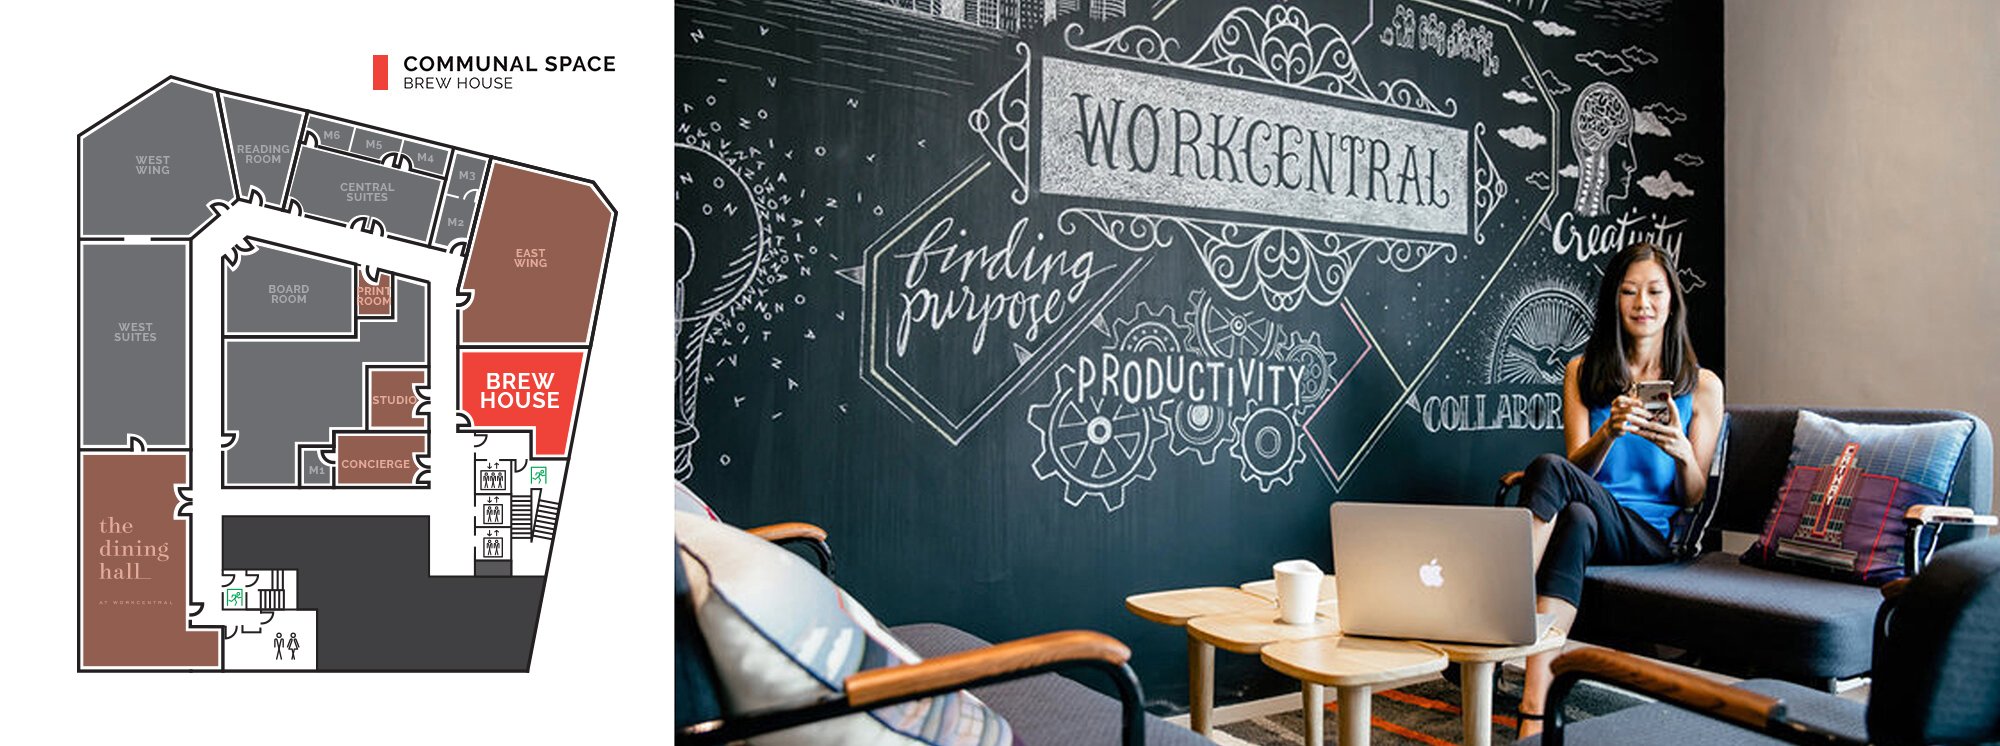 WC+Coworking+Space+Singapore+Brew+House+best+price+1.jpg